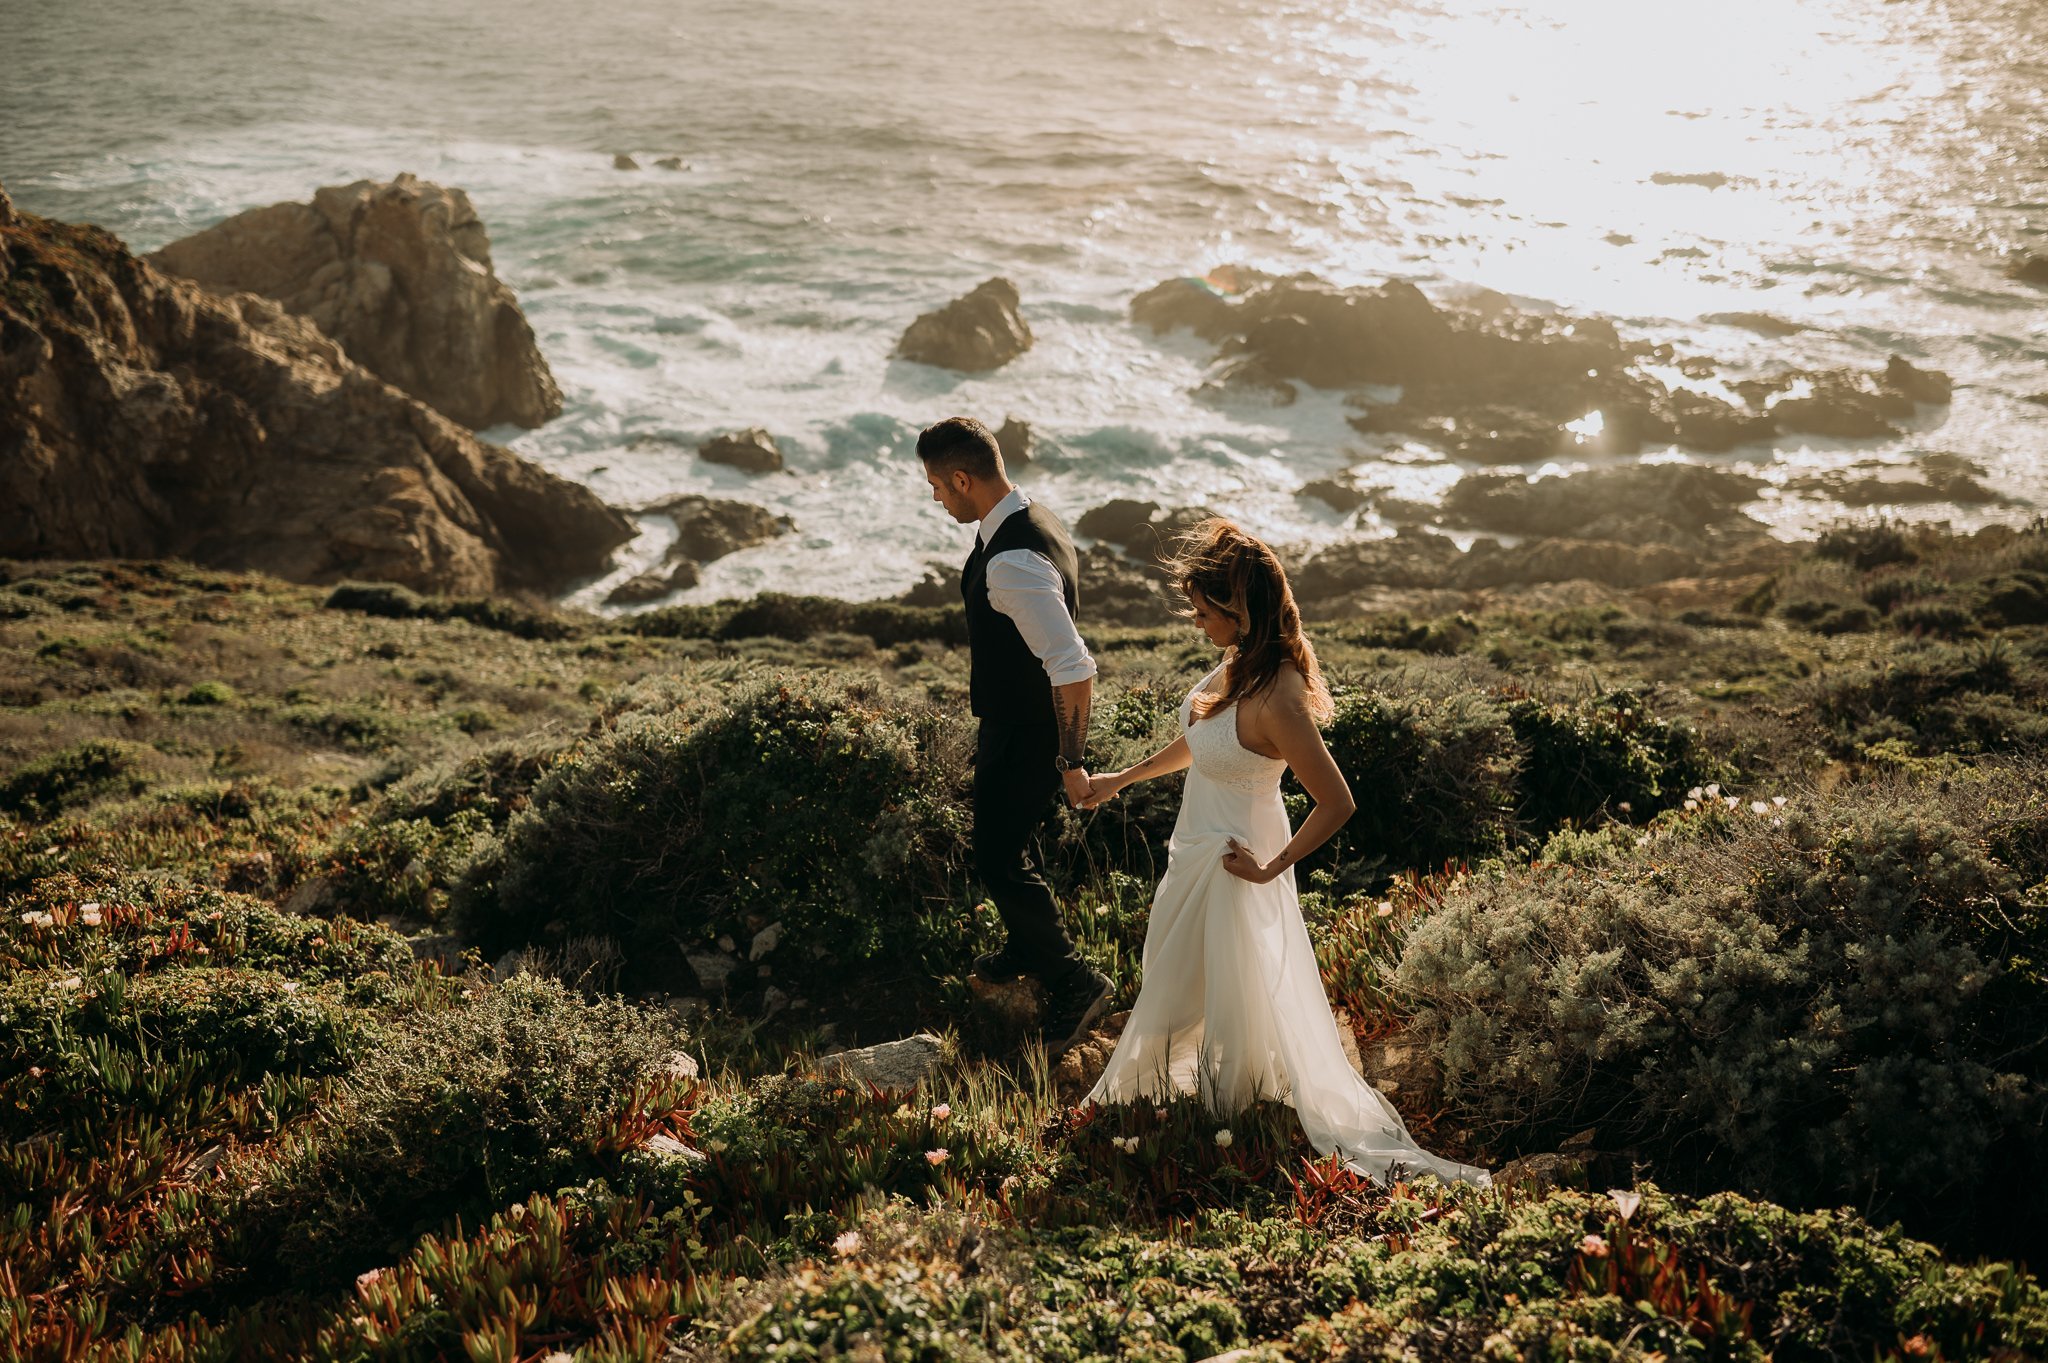 Post wedding photo session cliffs of Big Sur couple walking on trail at sunset